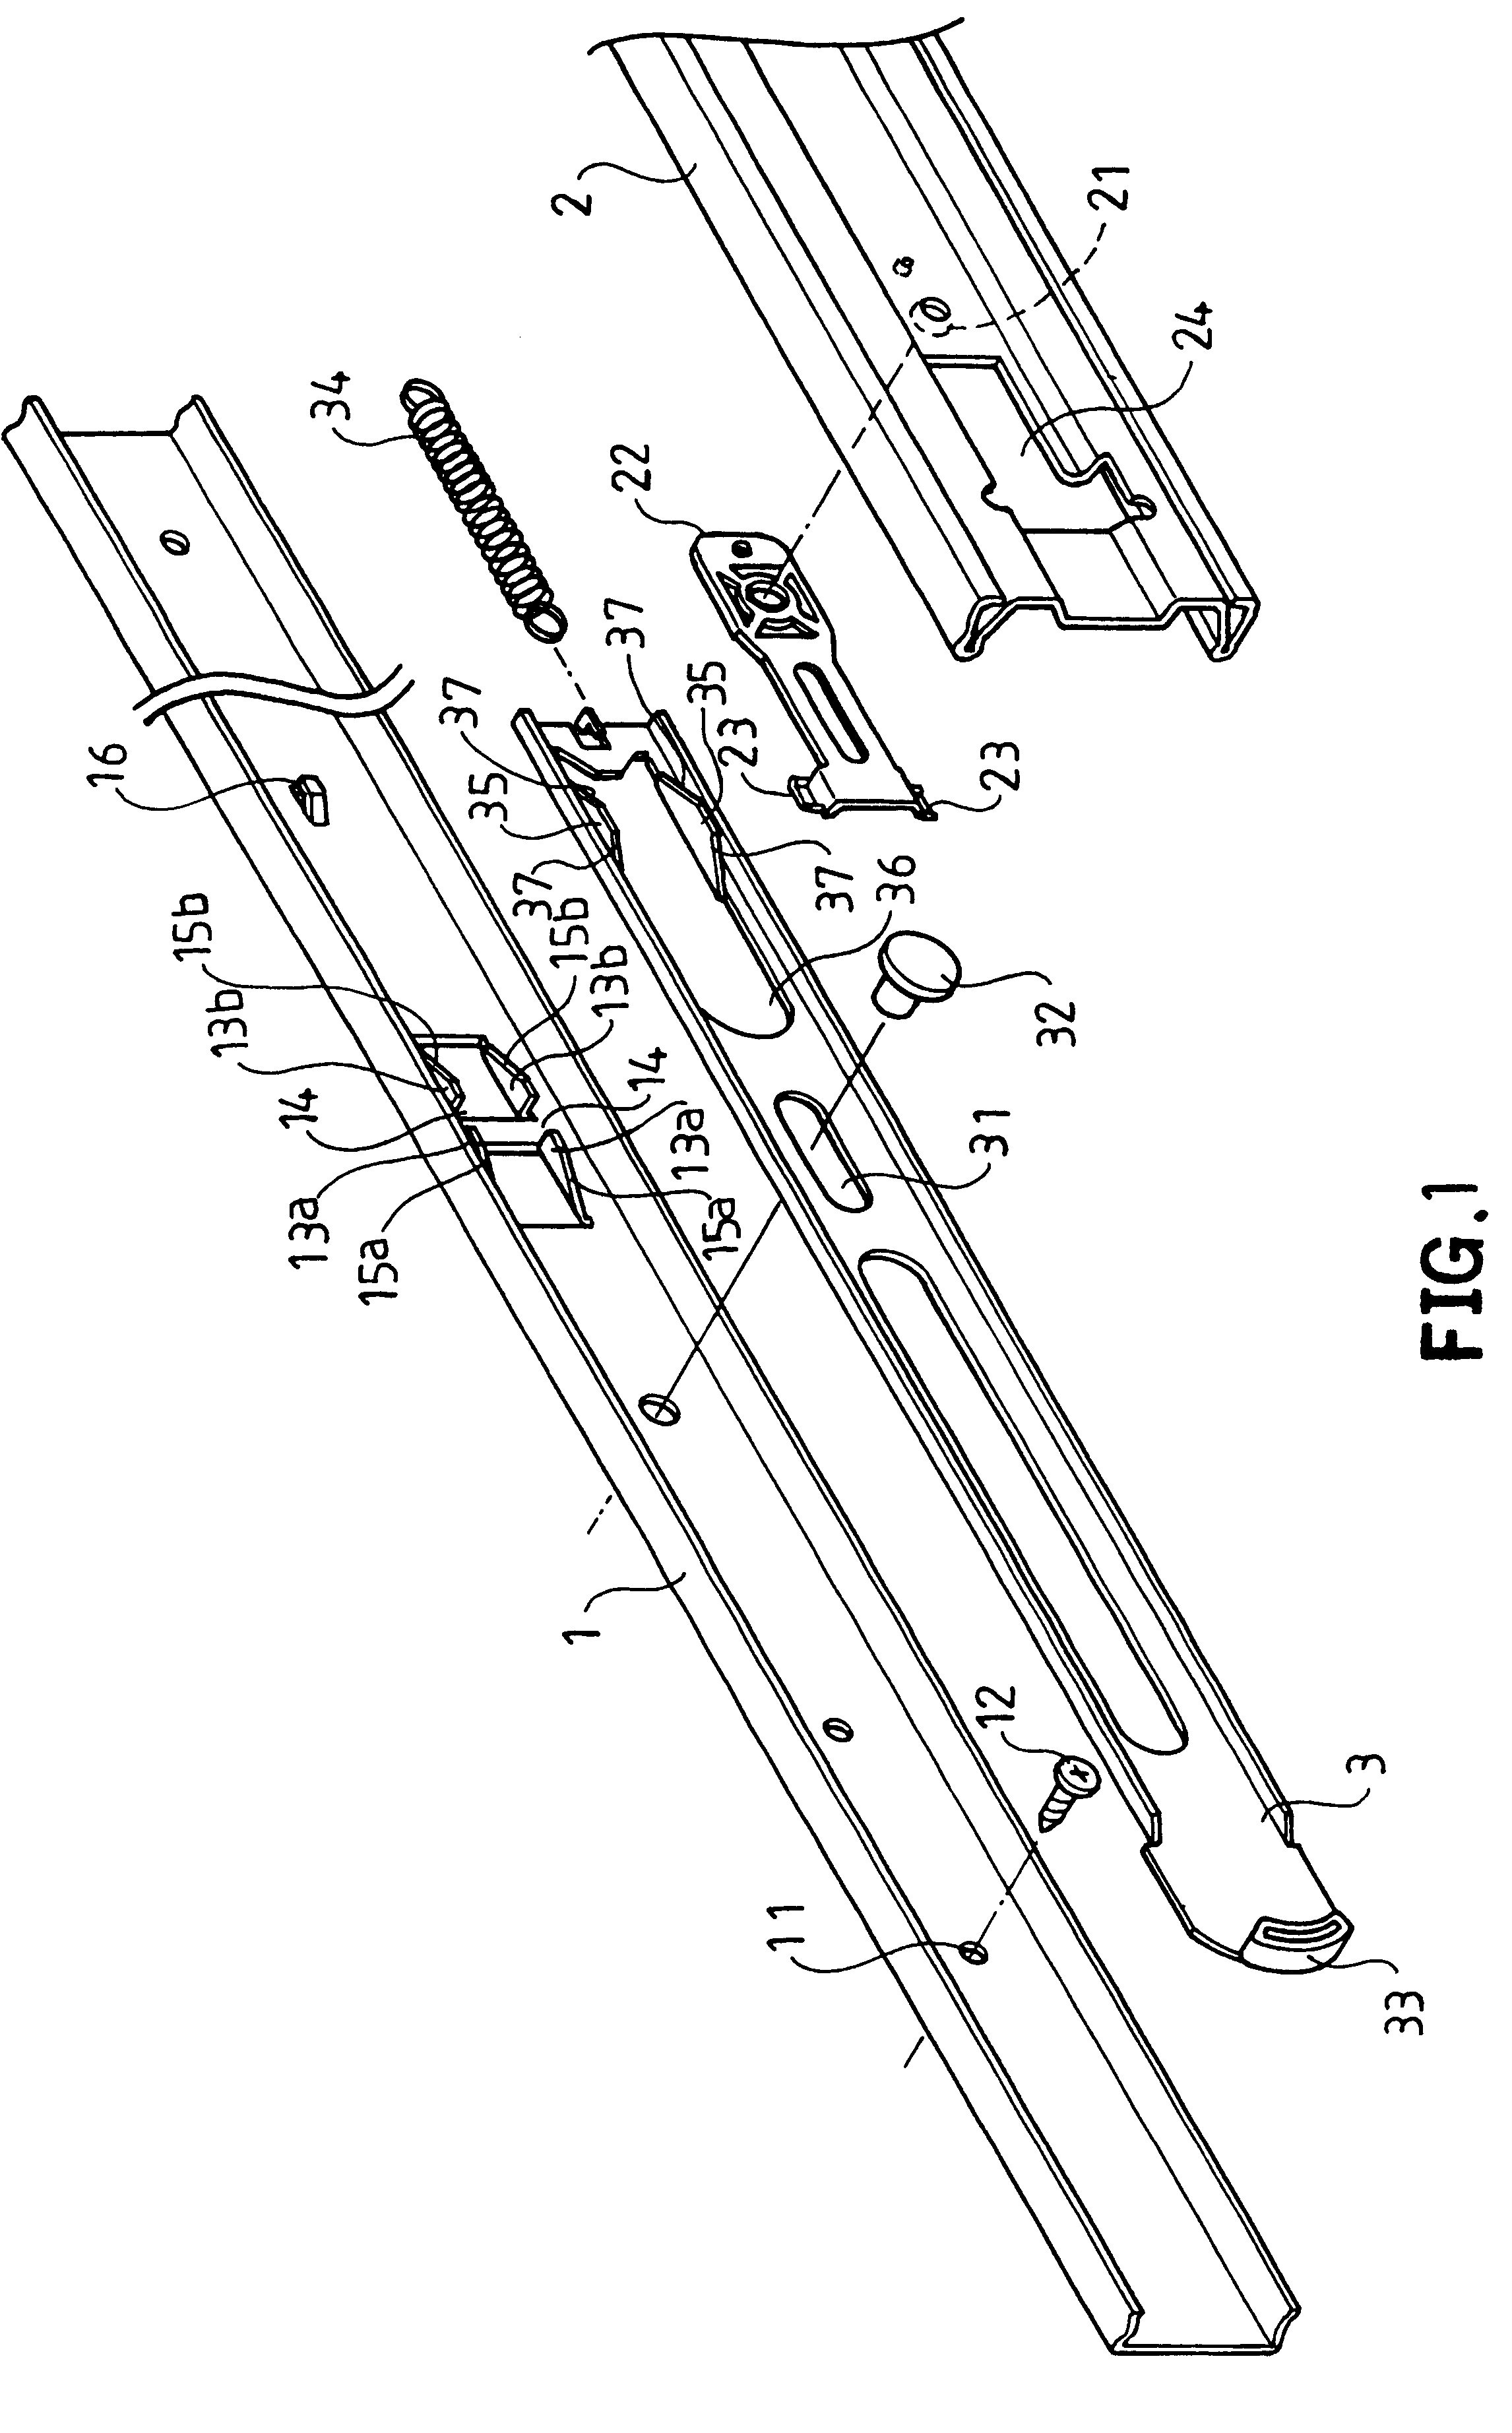 Lock snap structure of slide rail